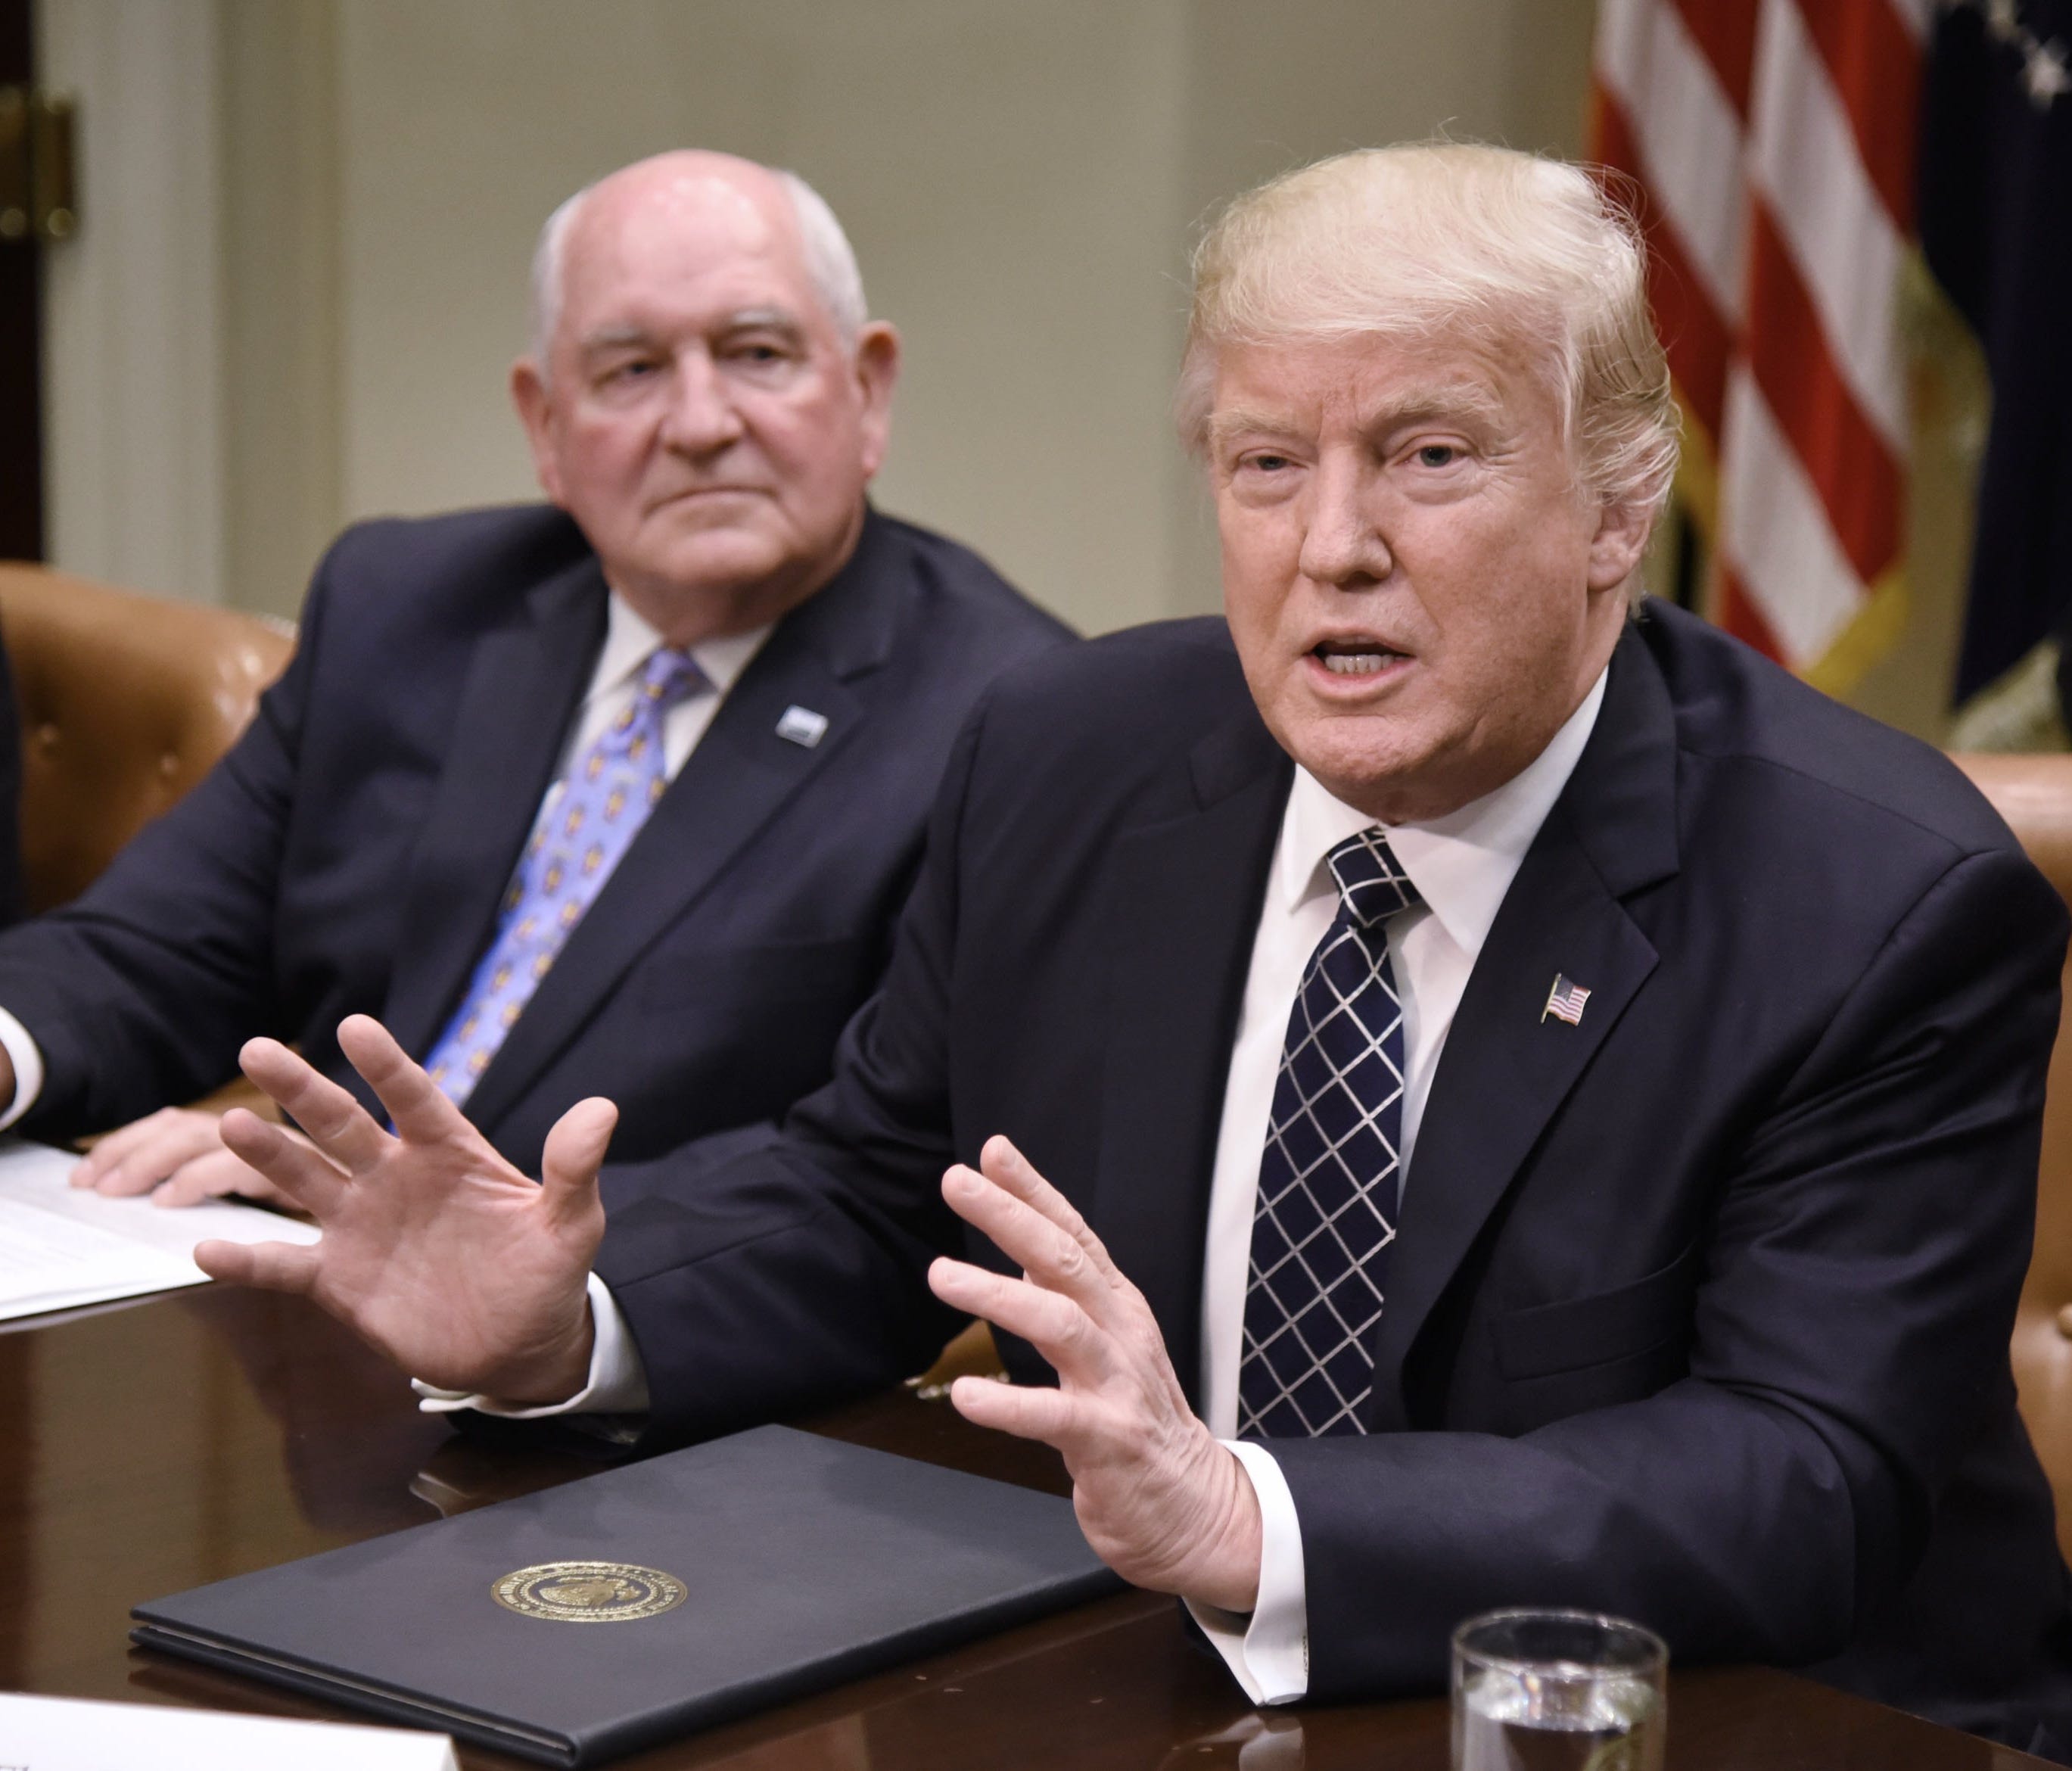 President Donald Trump speaks as Secretary of Agriculture Sonny Perdue looks on after signing the Executive Order Promoting Agriculture and Rural Prosperity in America during a roundtable with farmers in the Roosevelt Room of the White House in Washi